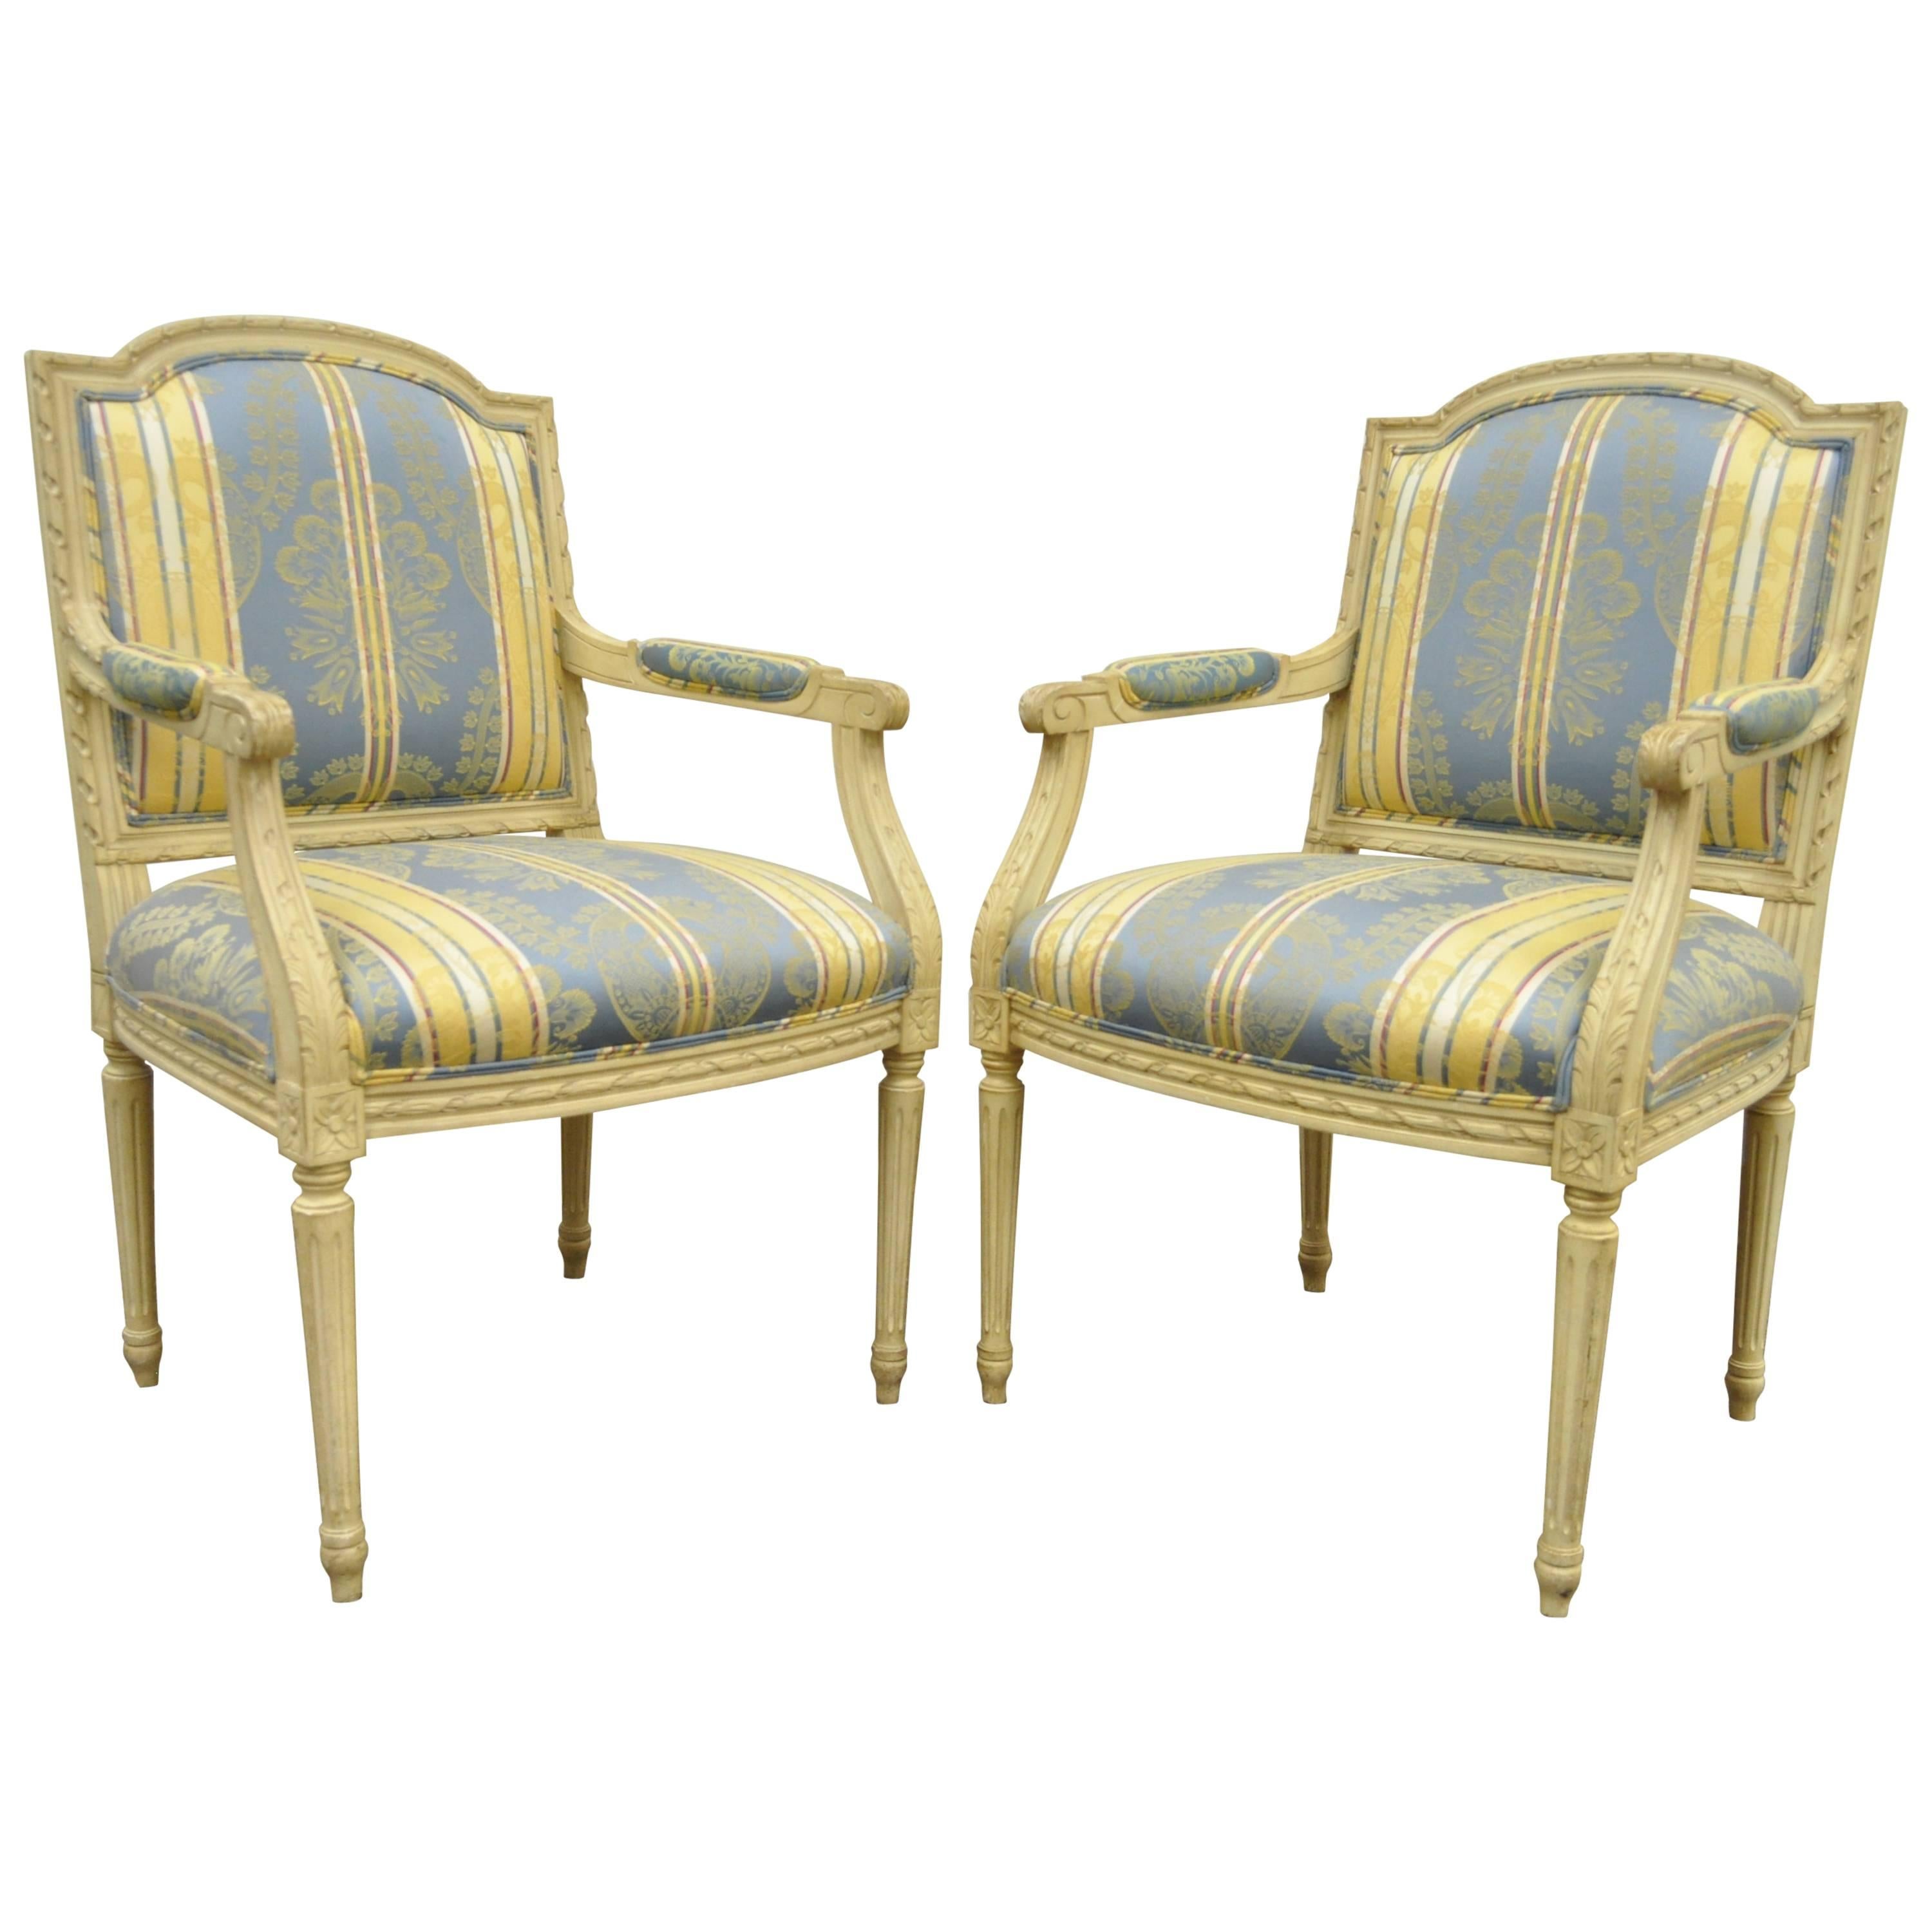 Pair of French Louis XVI Style Carved Cream Painted Fauteuil Dining Arm Chairs B